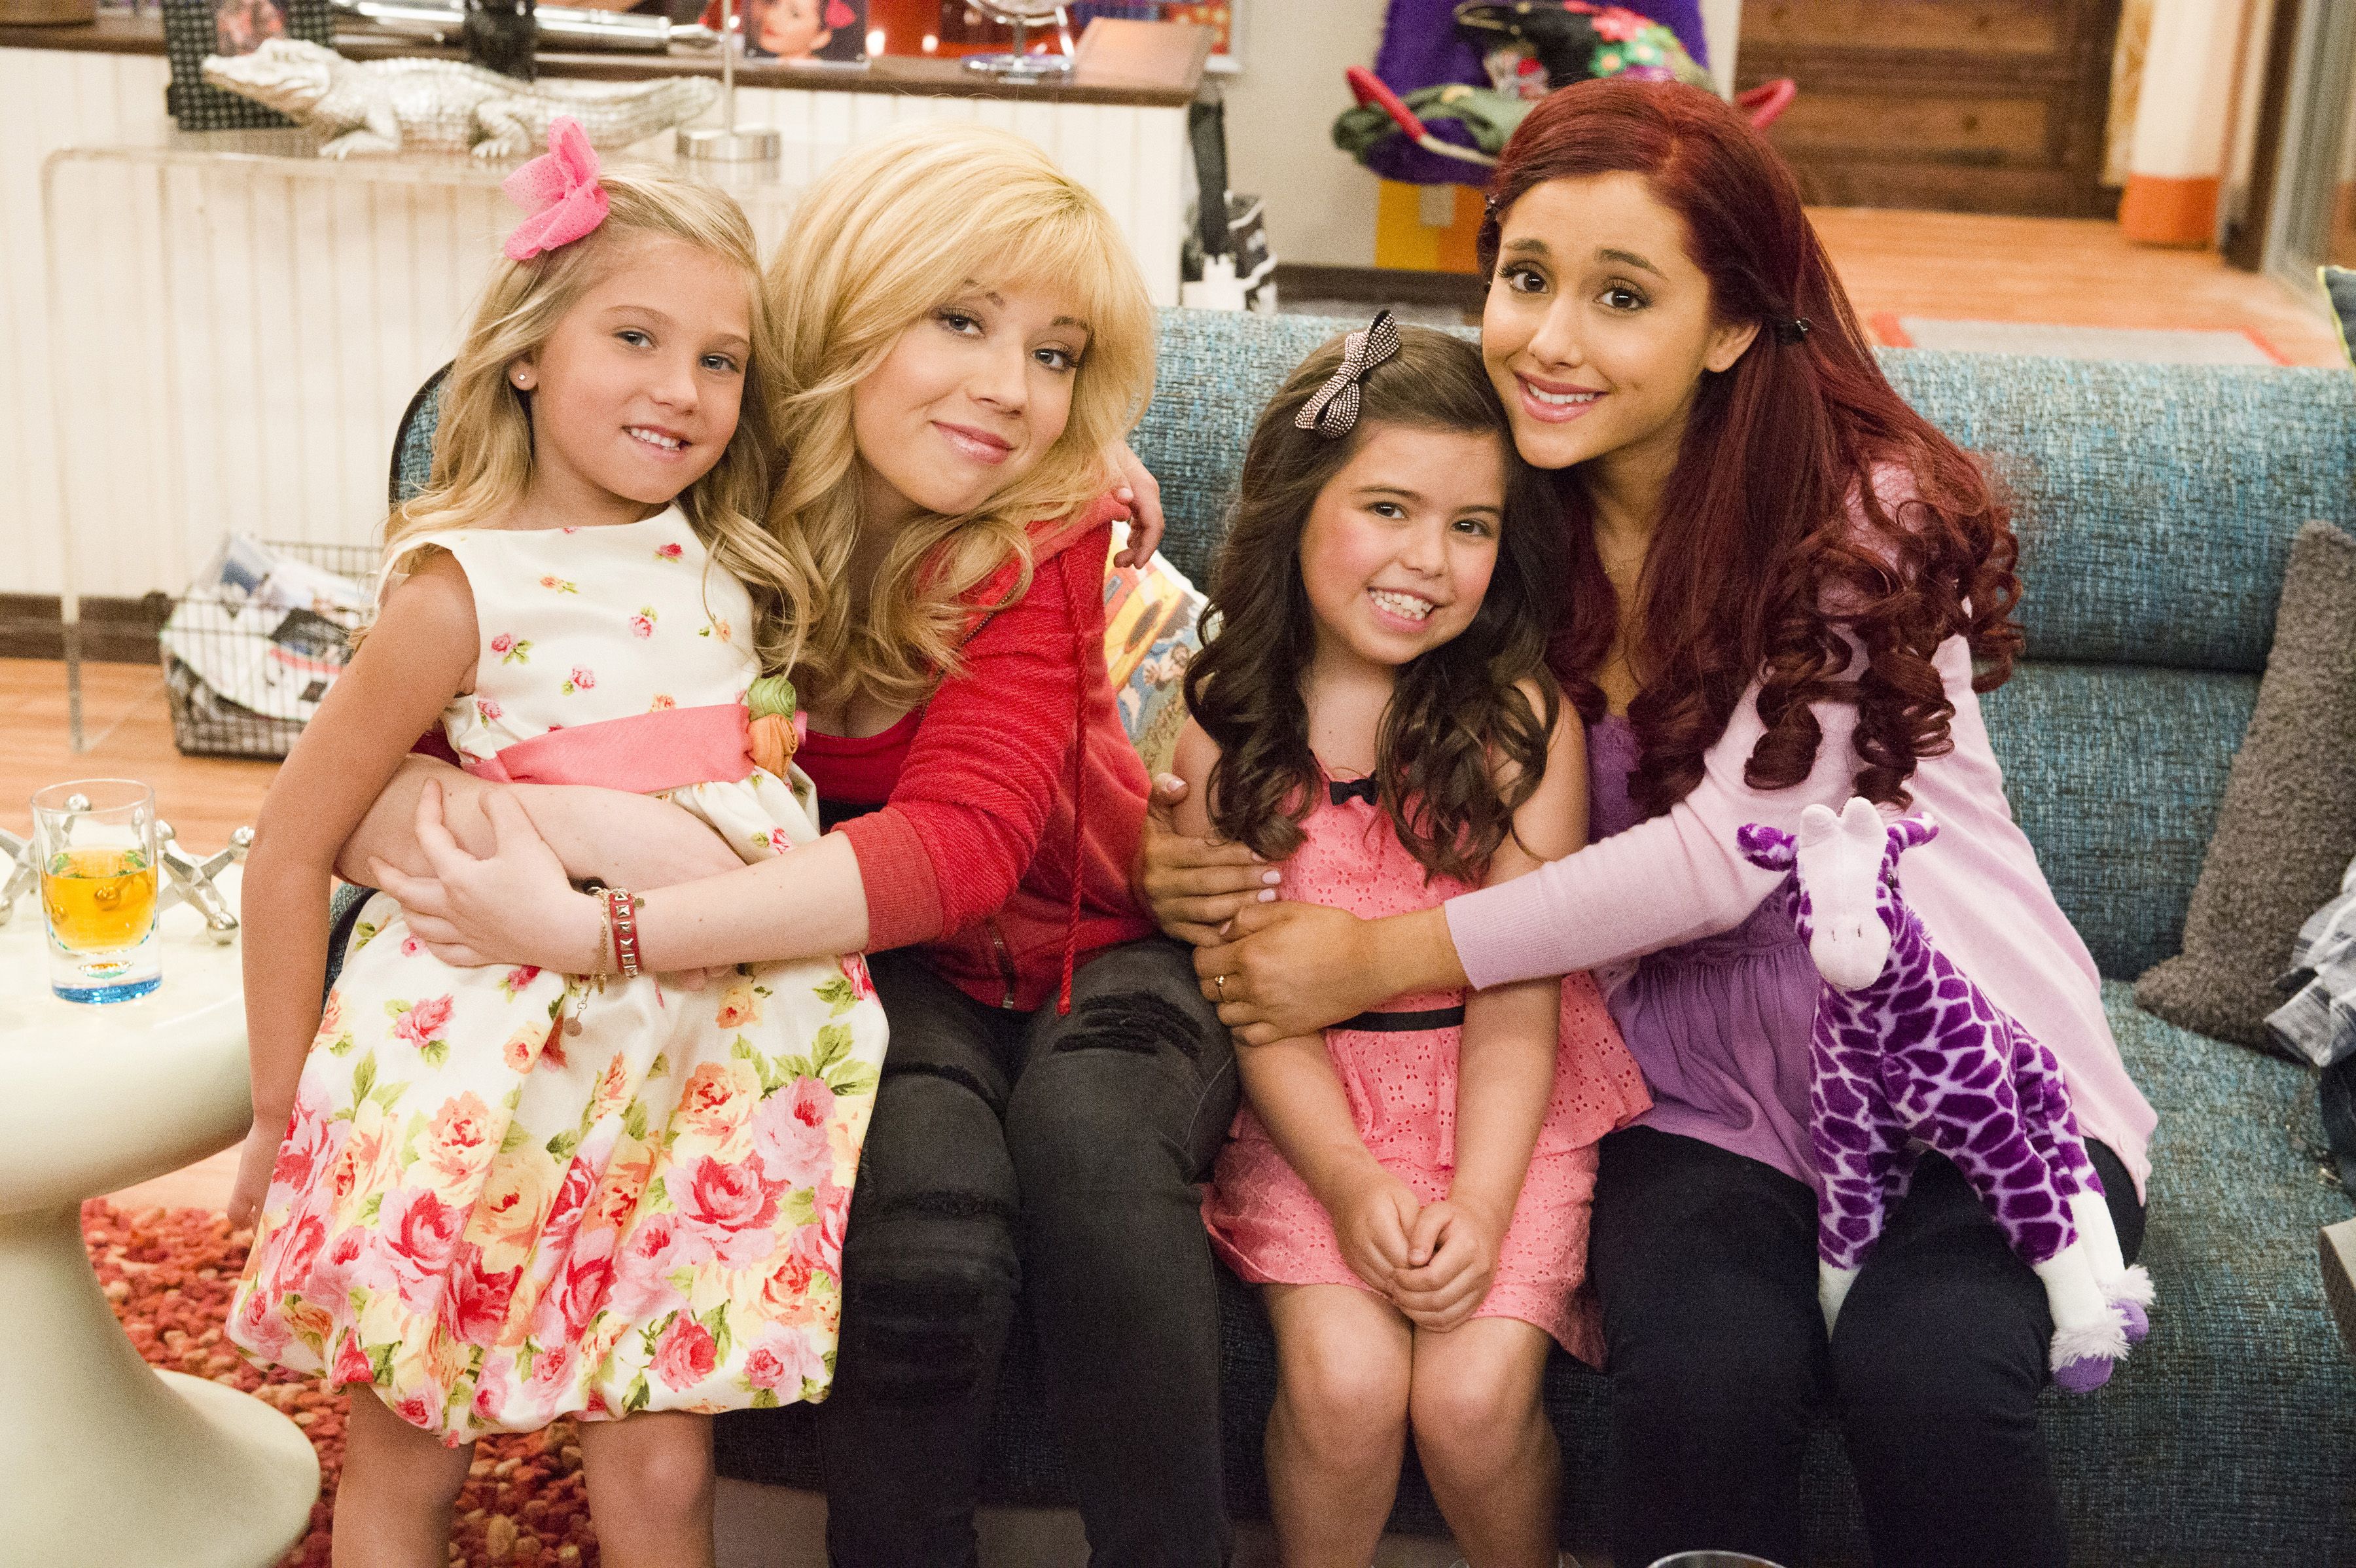 keep calm and love sam and cat